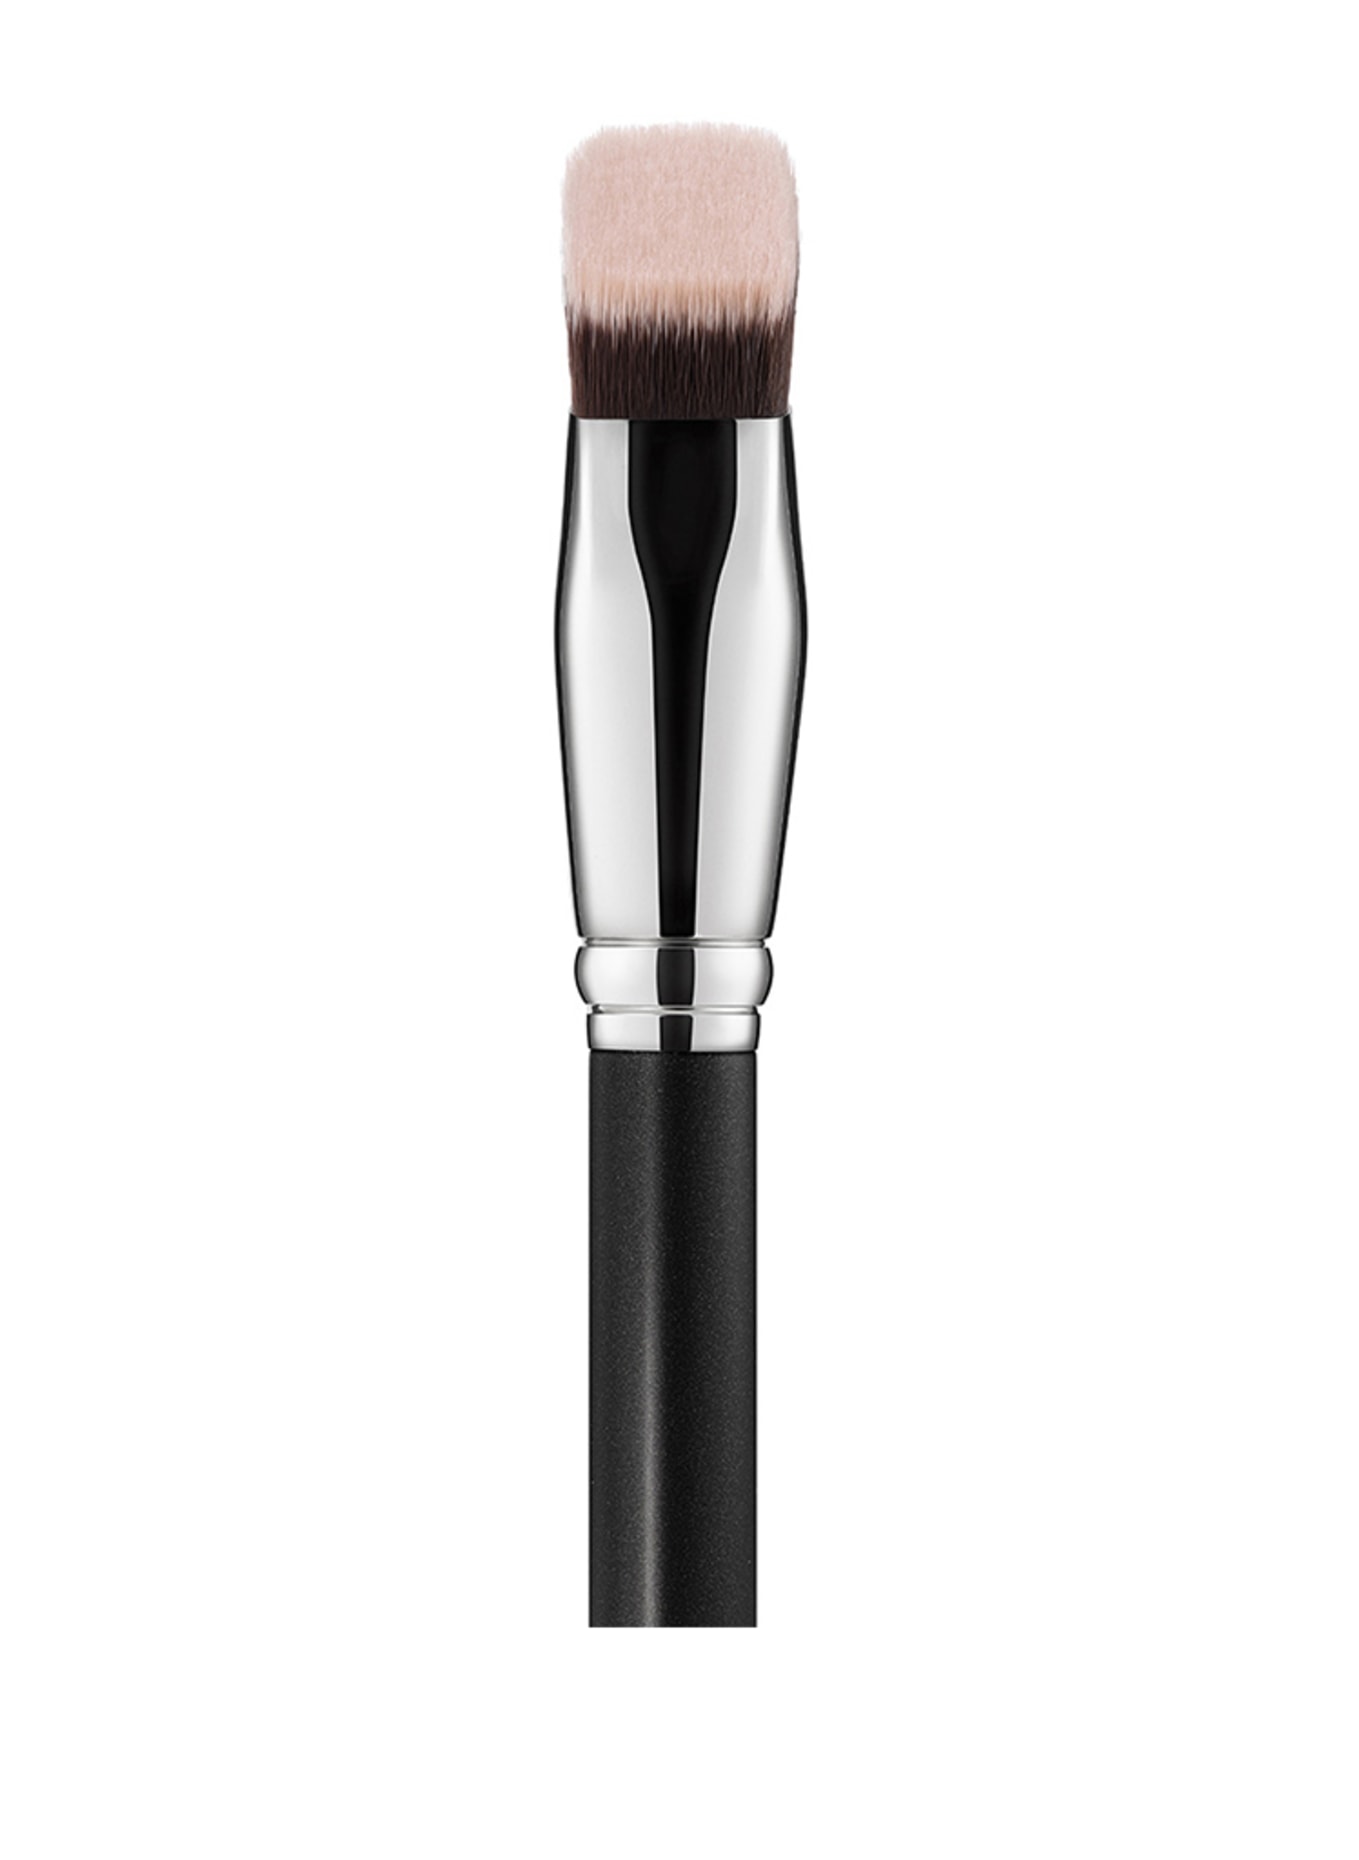 M.A.C SMOOTHE EDGE ALL OVER FACE BRUSH (Bild 3)